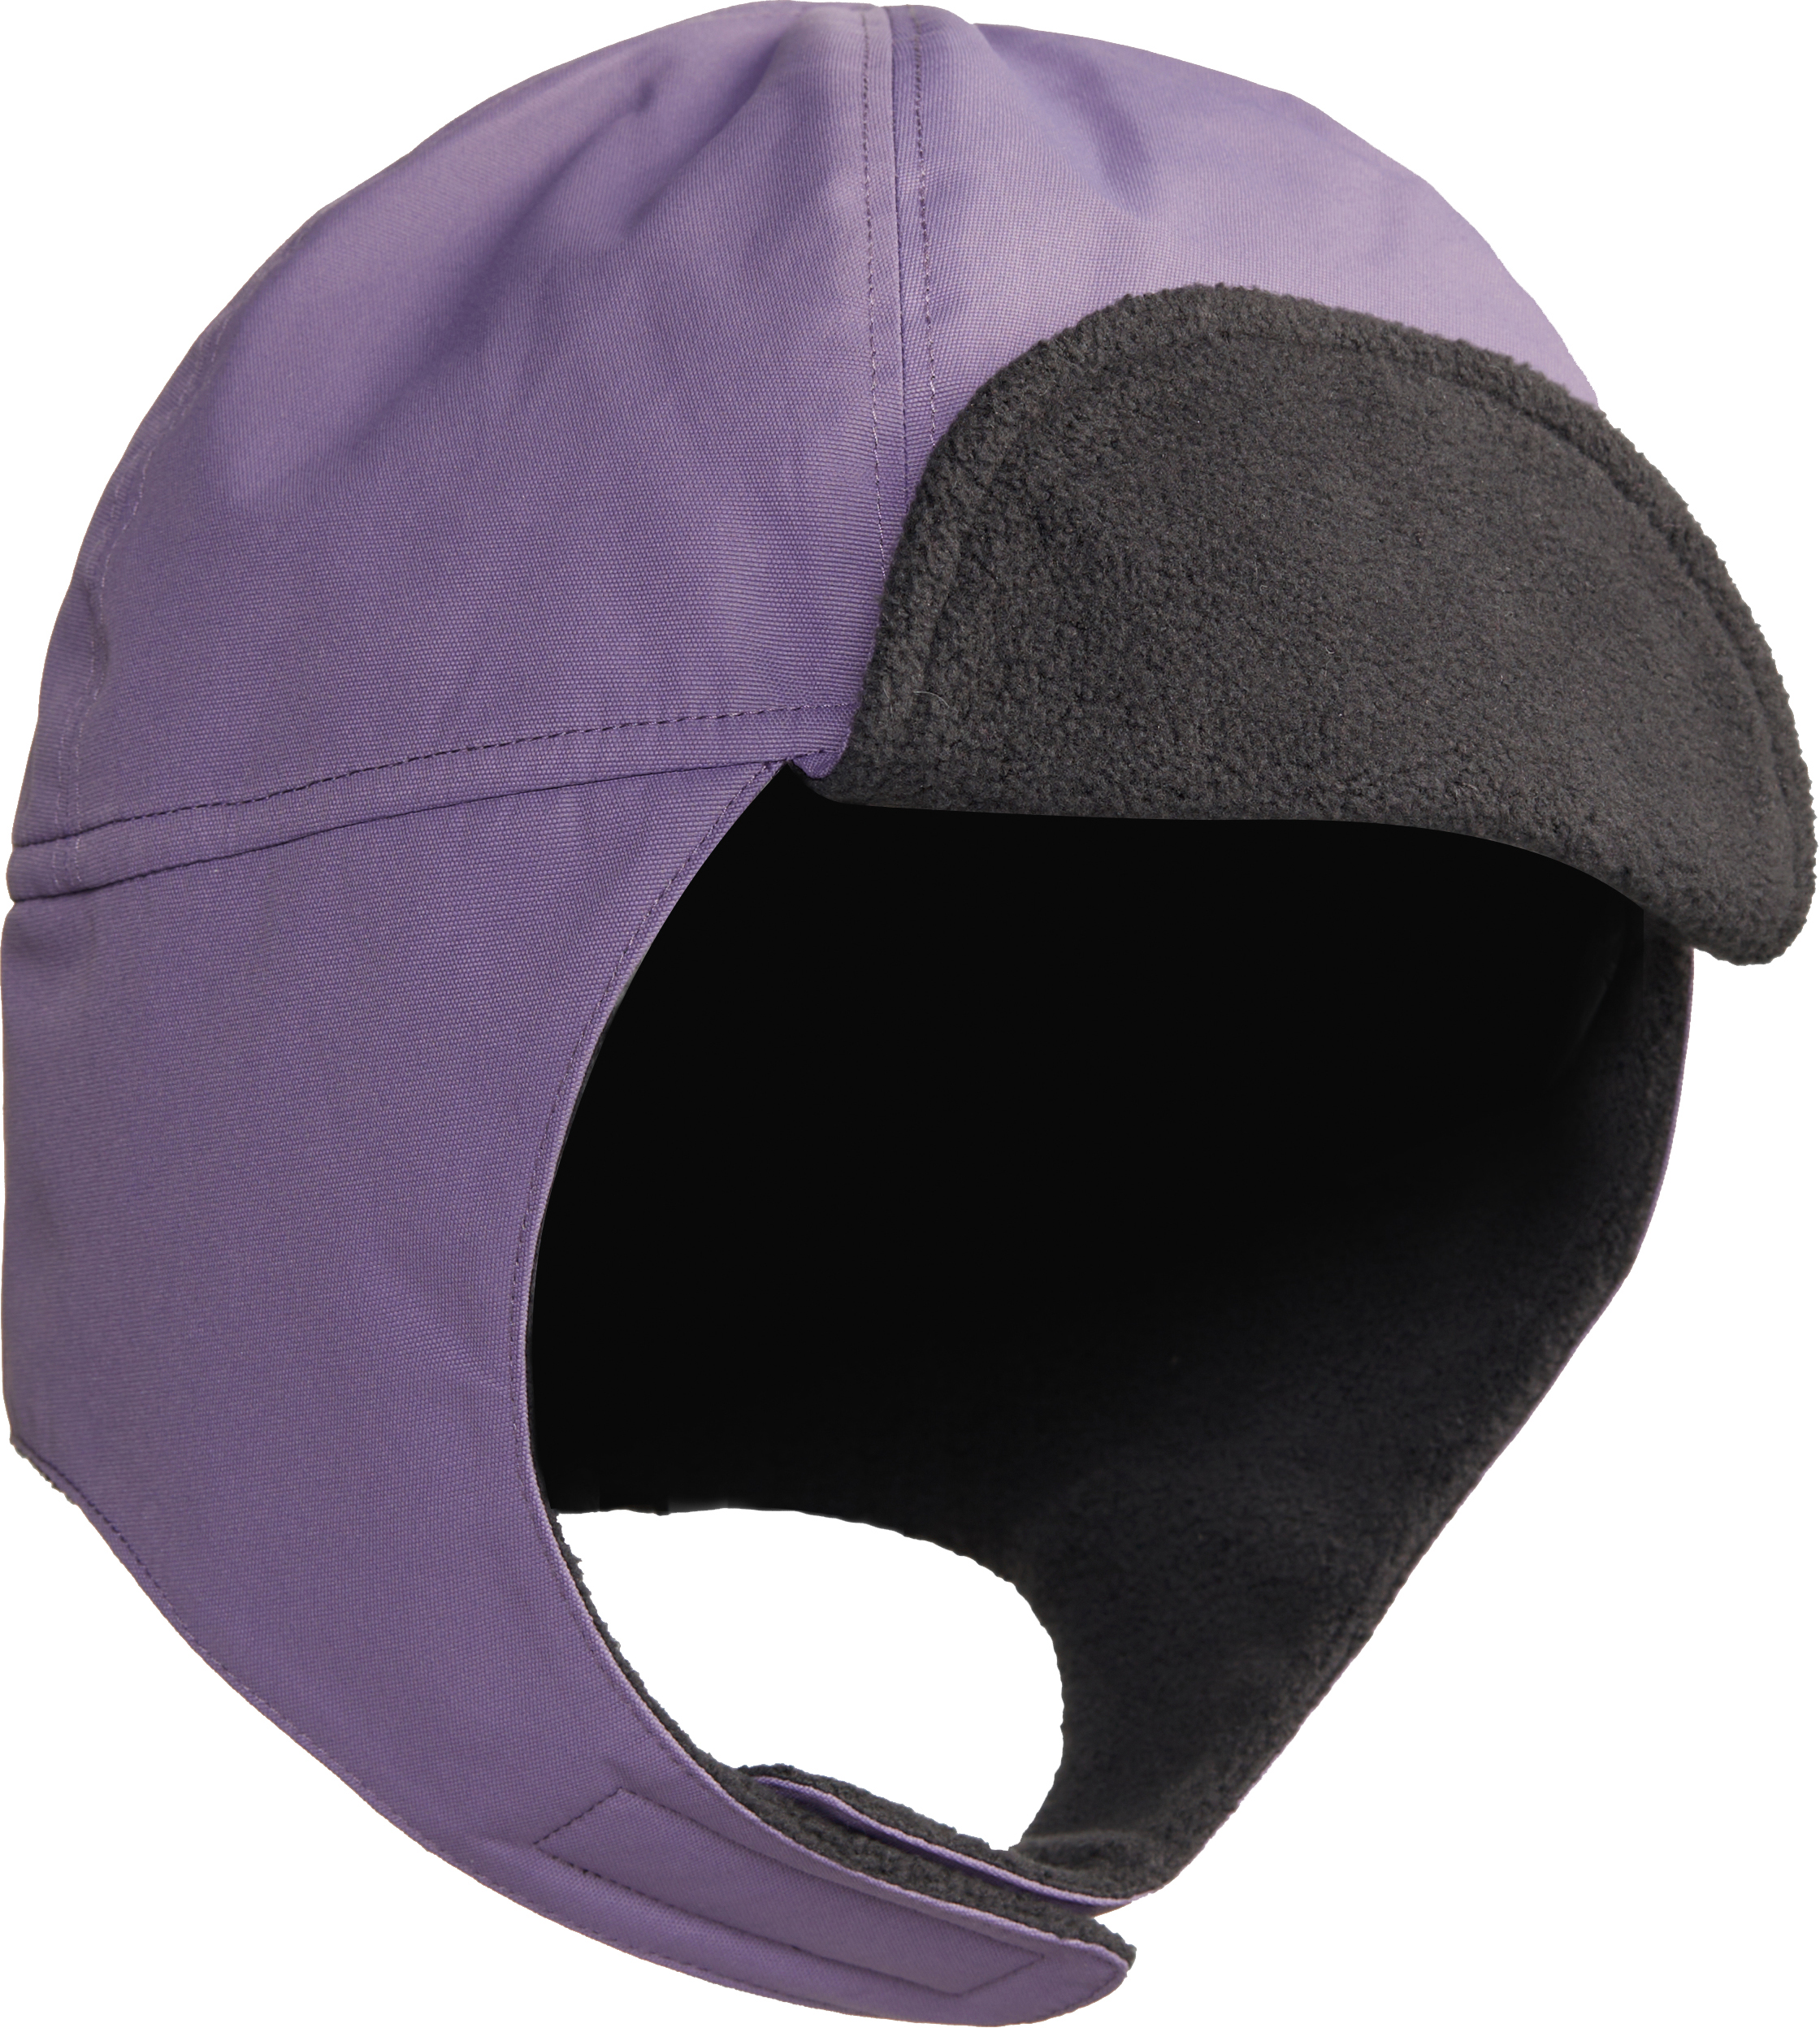 hat with earflaps, SAVE 44% 